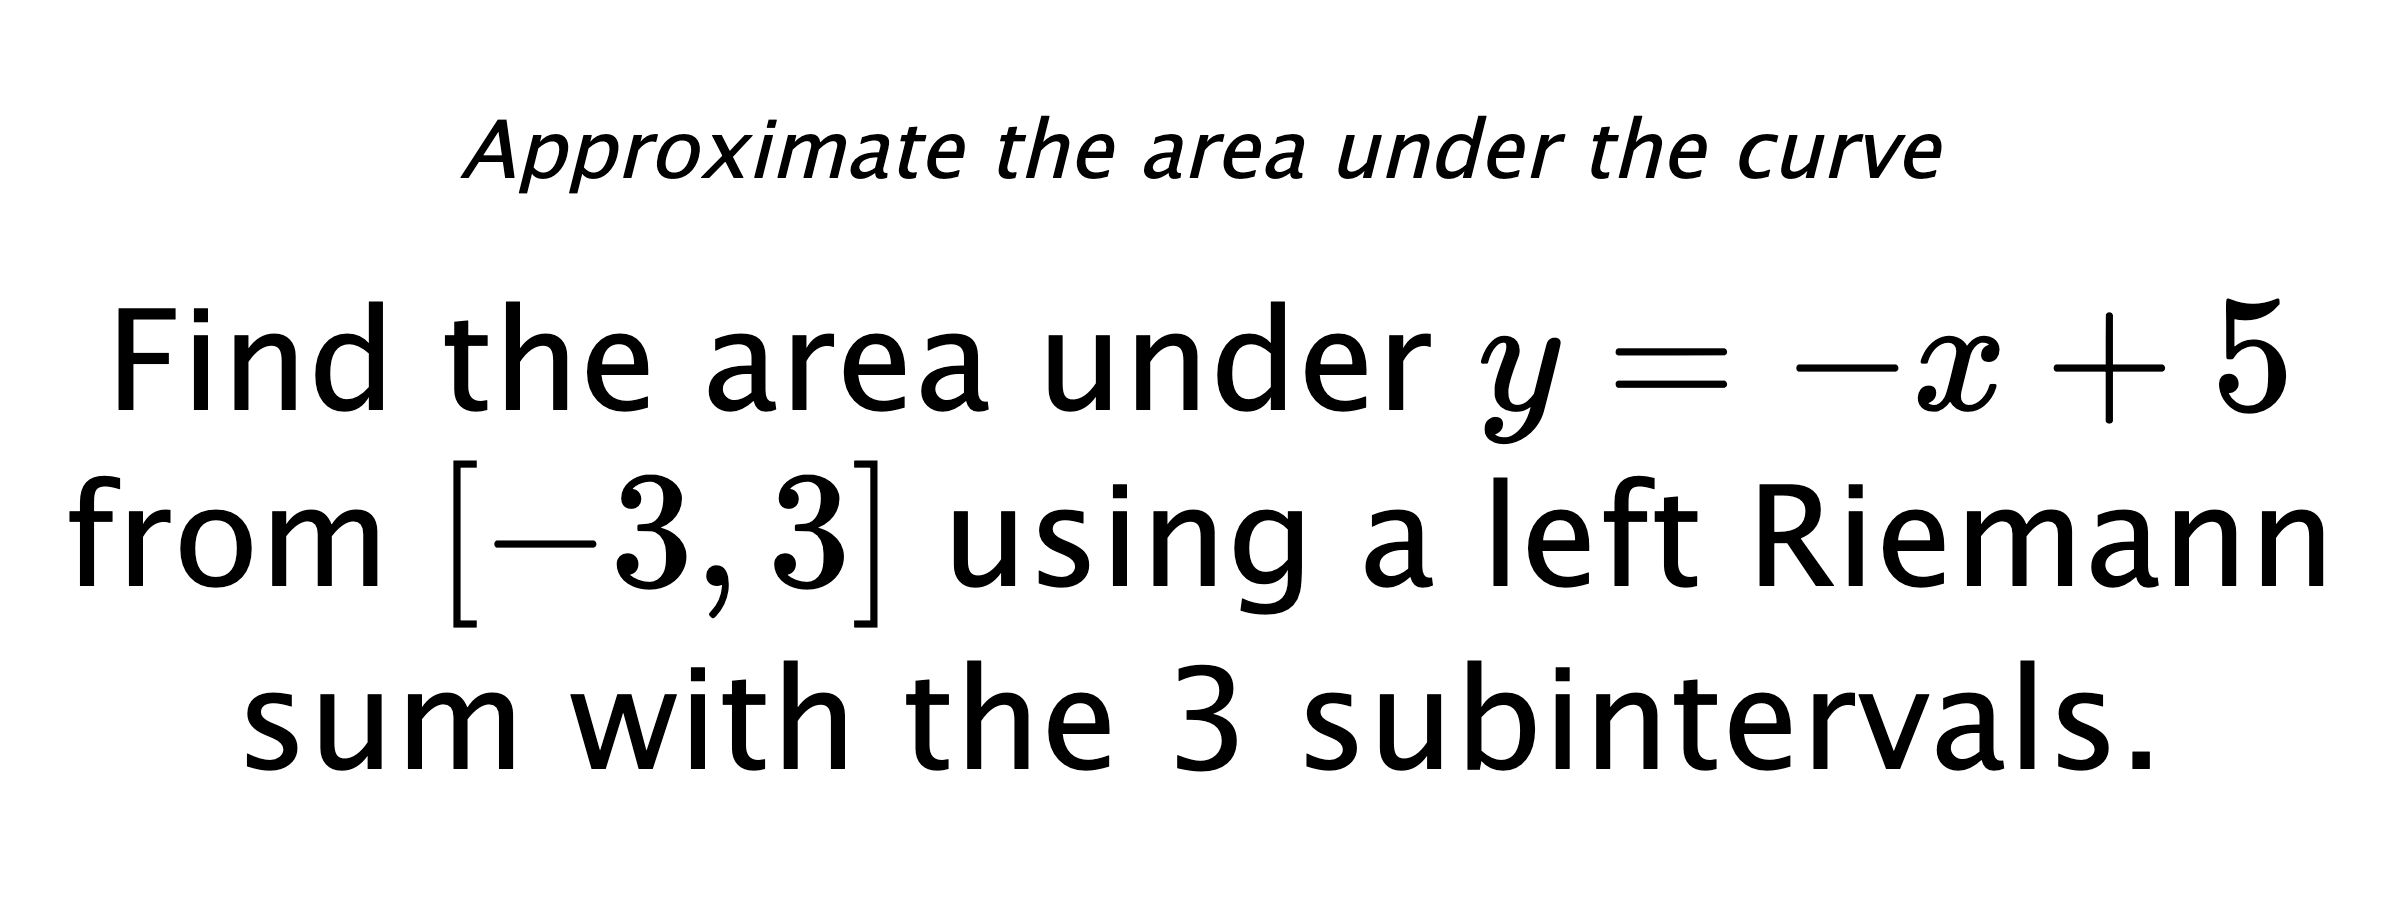 Approximate the area under the curve Find the area under $ y=-x+5 $ from $ [-3,3] $ using a left Riemann sum with the 3 subintervals.